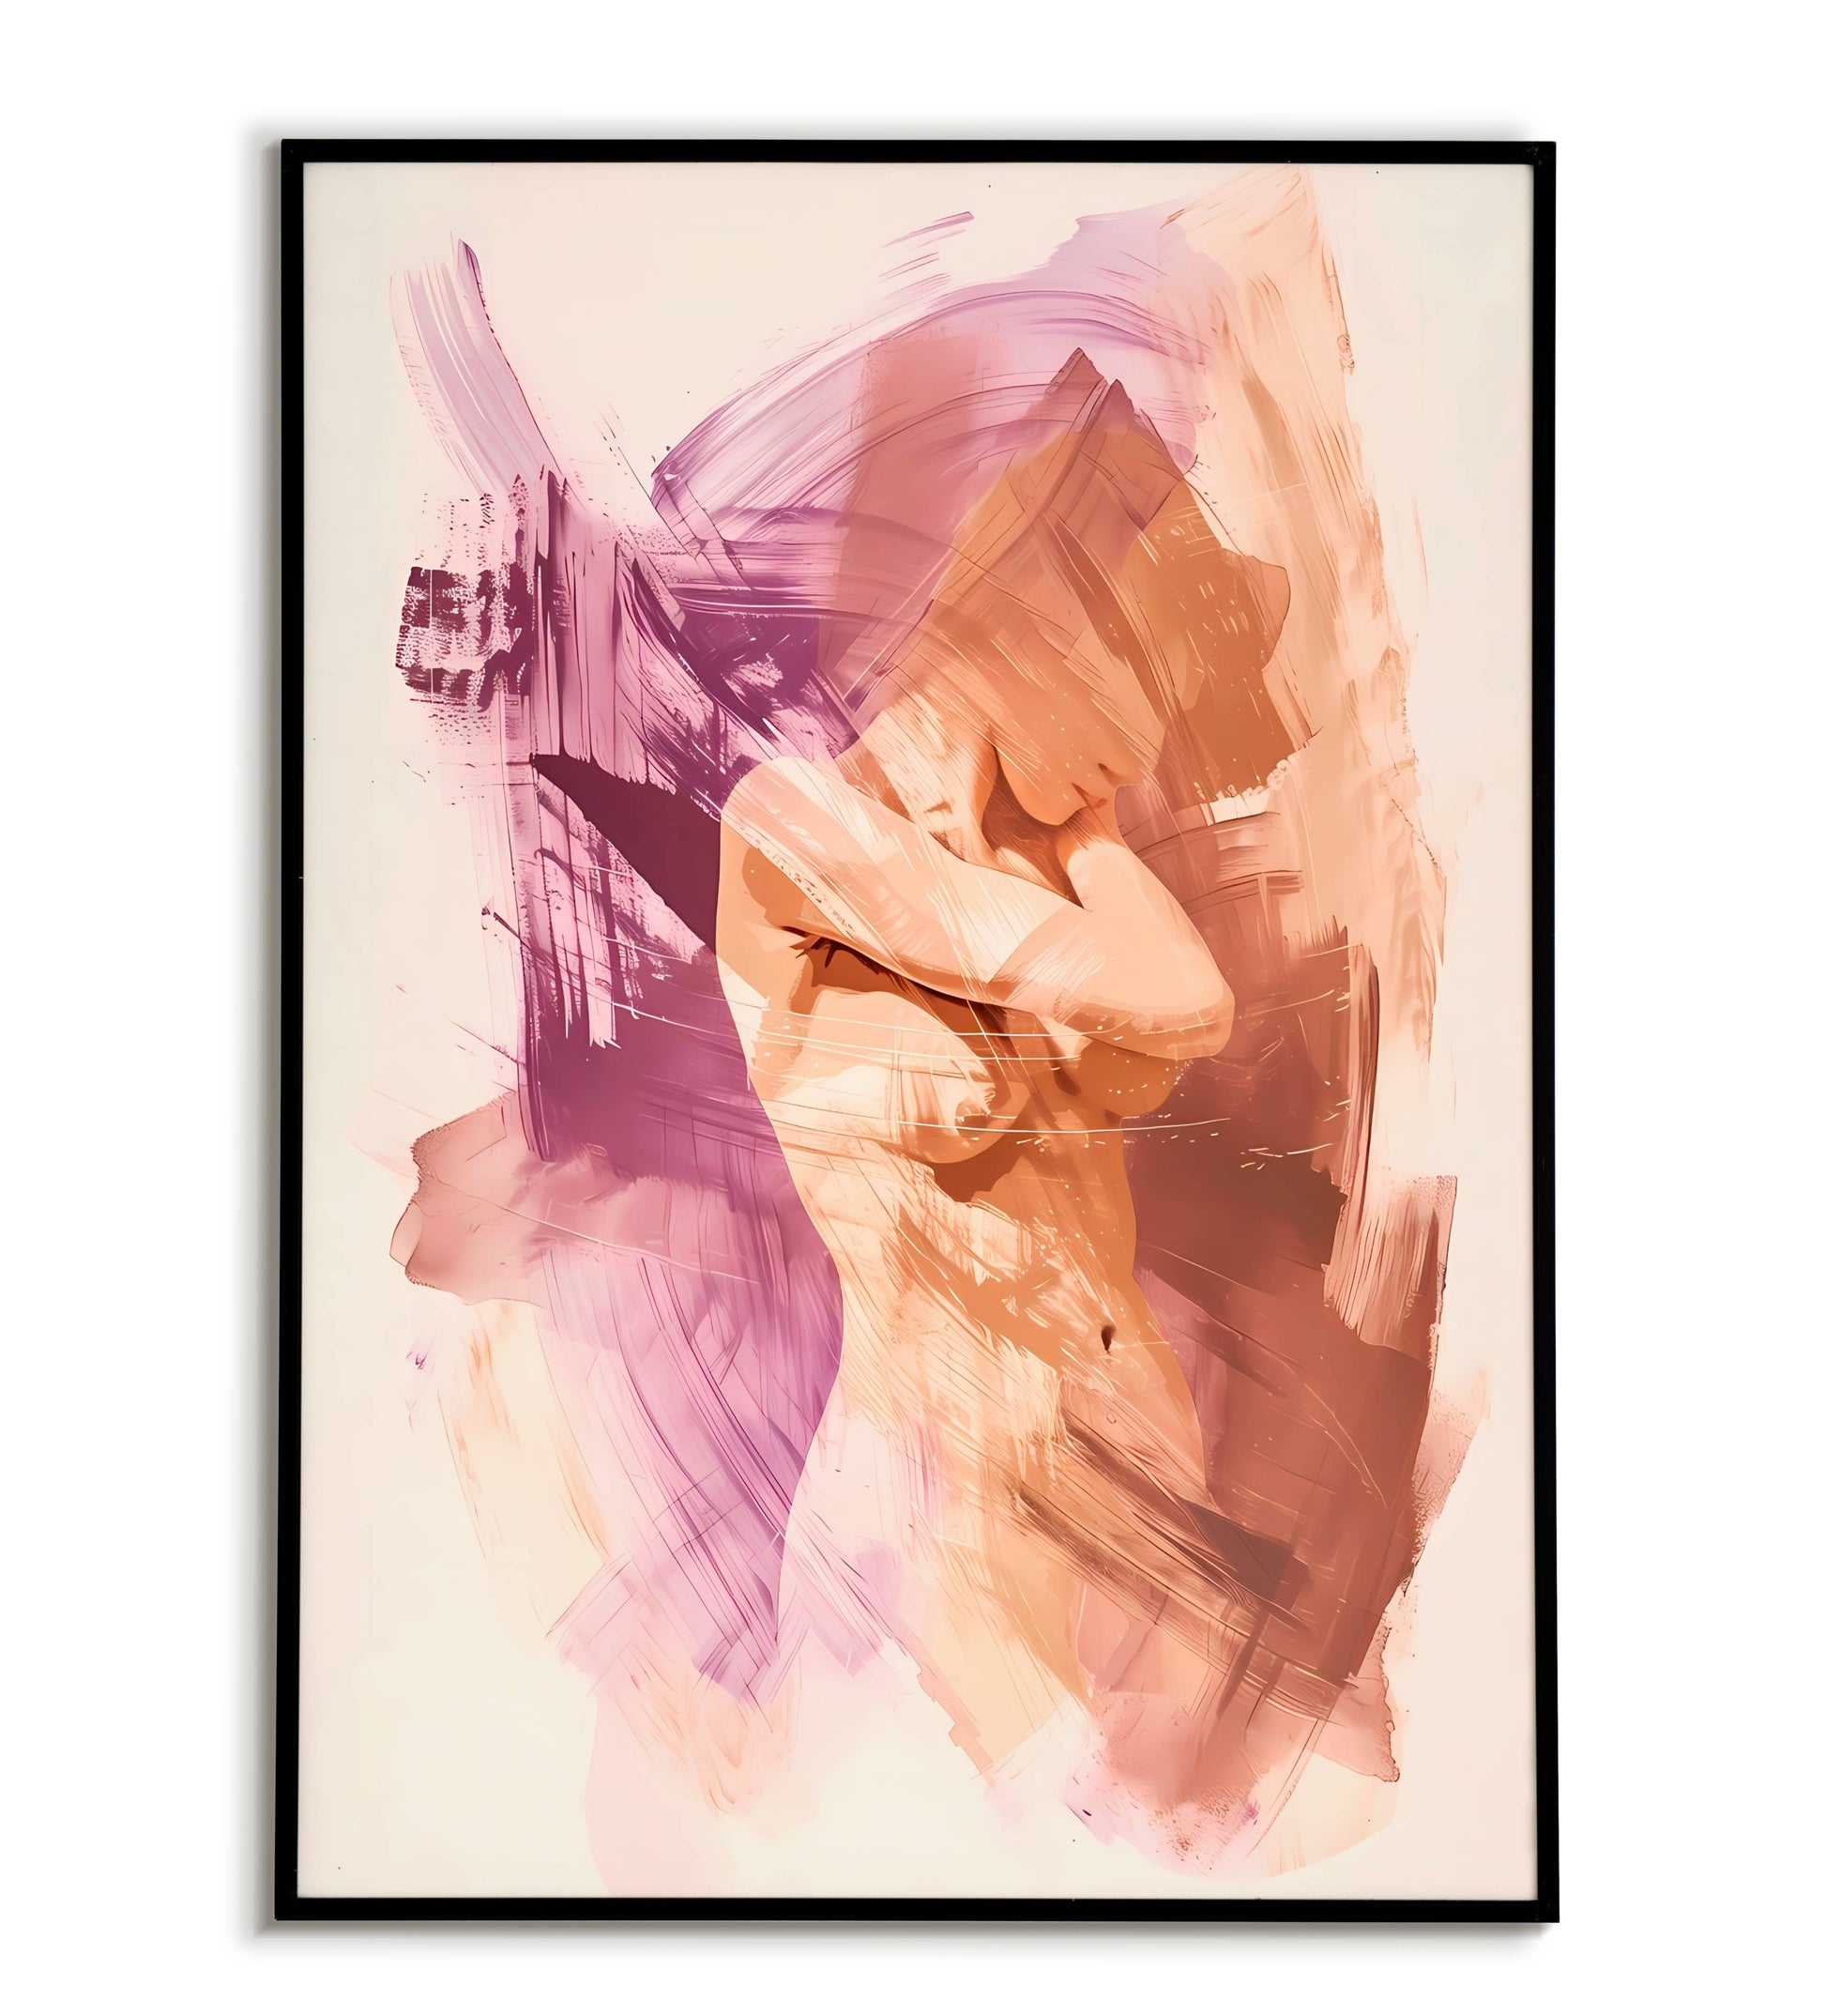 "Woman Body Abstract" printable abstract art featuring a woman's form.